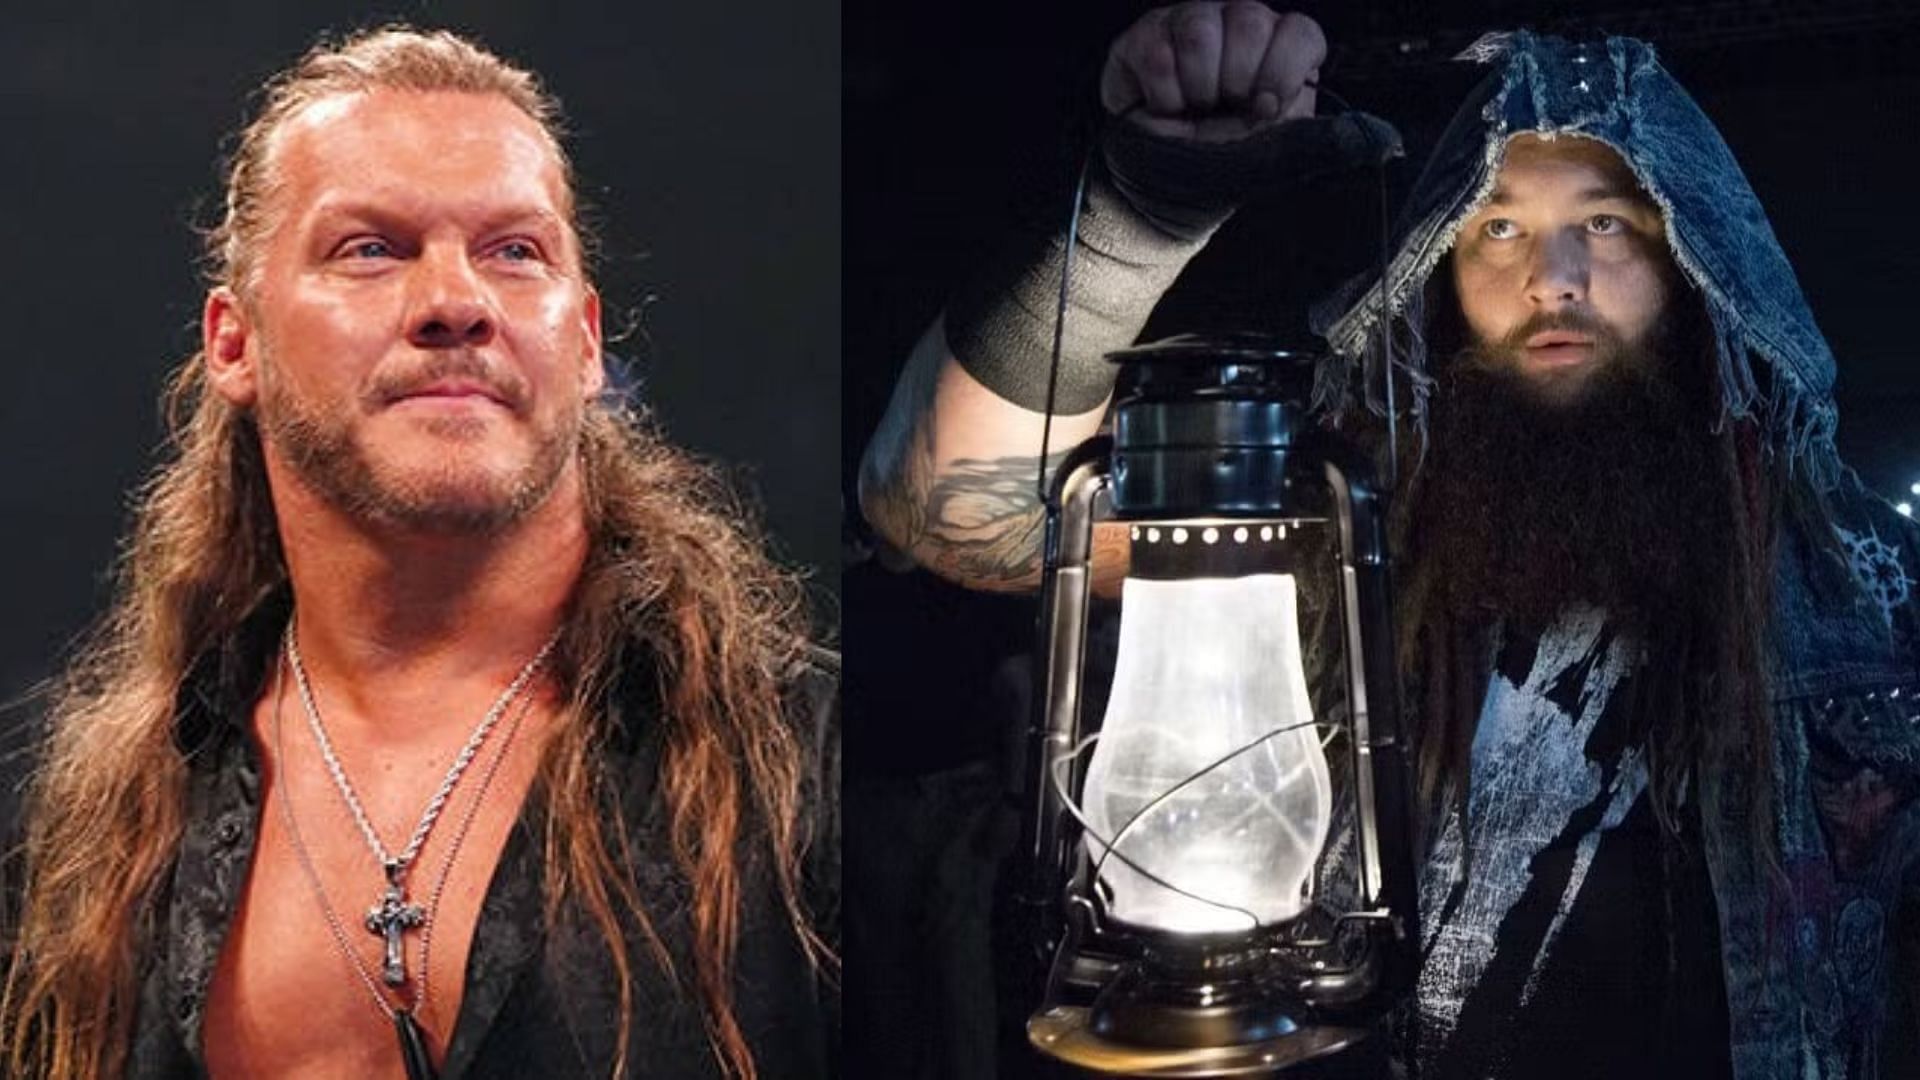 Chris Jericho opens up about his relationship with Bray Wyatt